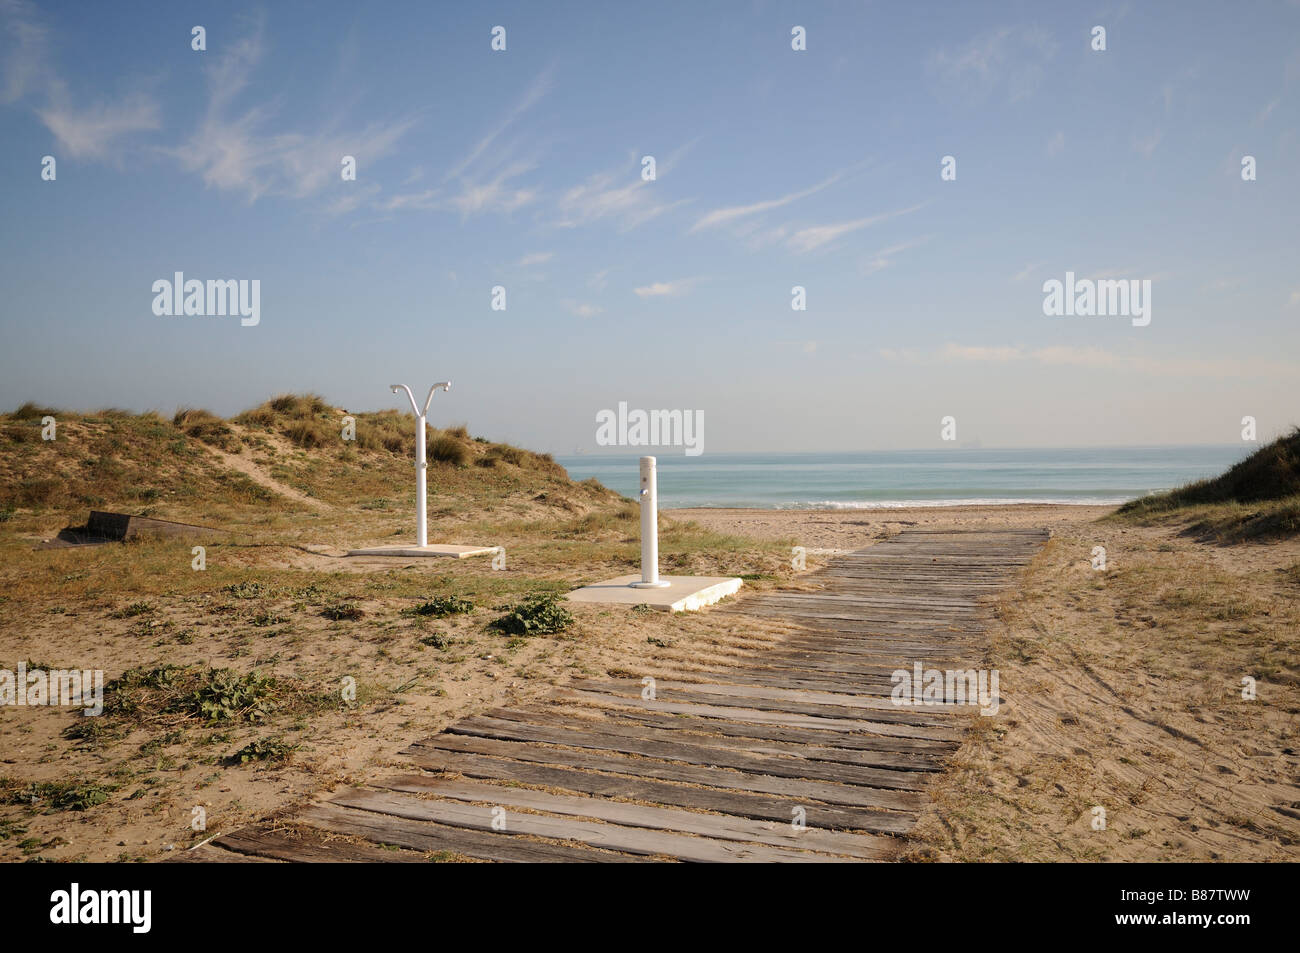 Wooden walkway to the beach and showers. El Saler. Valencian Community. Spain Stock Photo